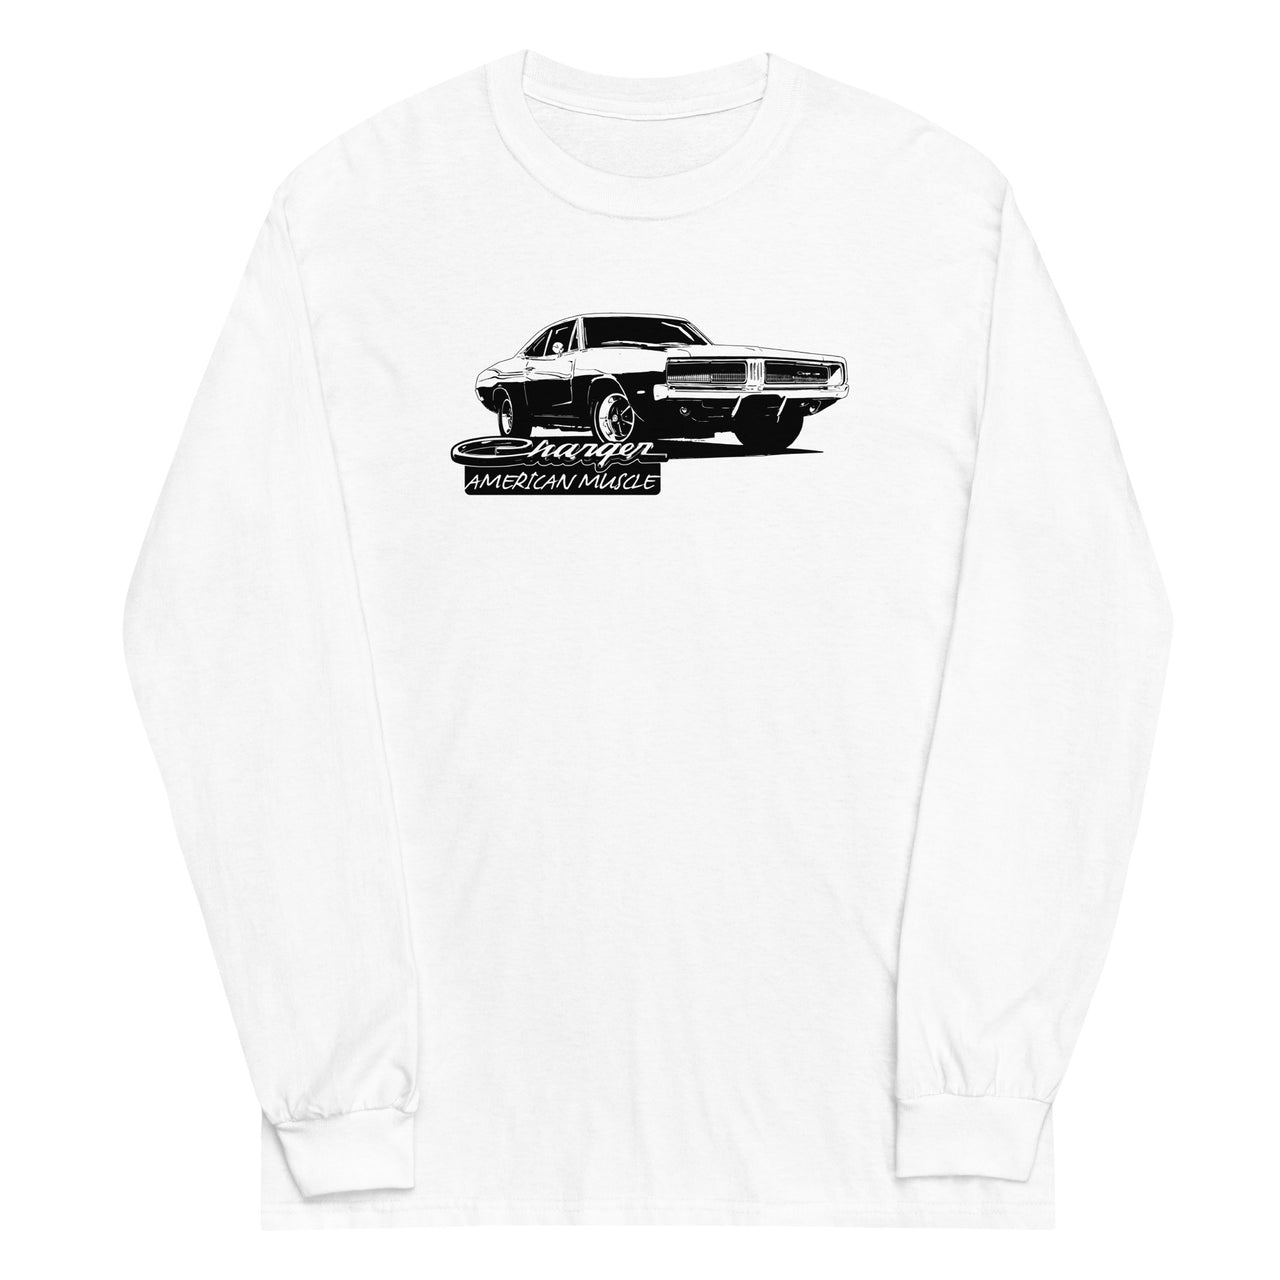 1969 Charger Long Sleeve Shirt in white